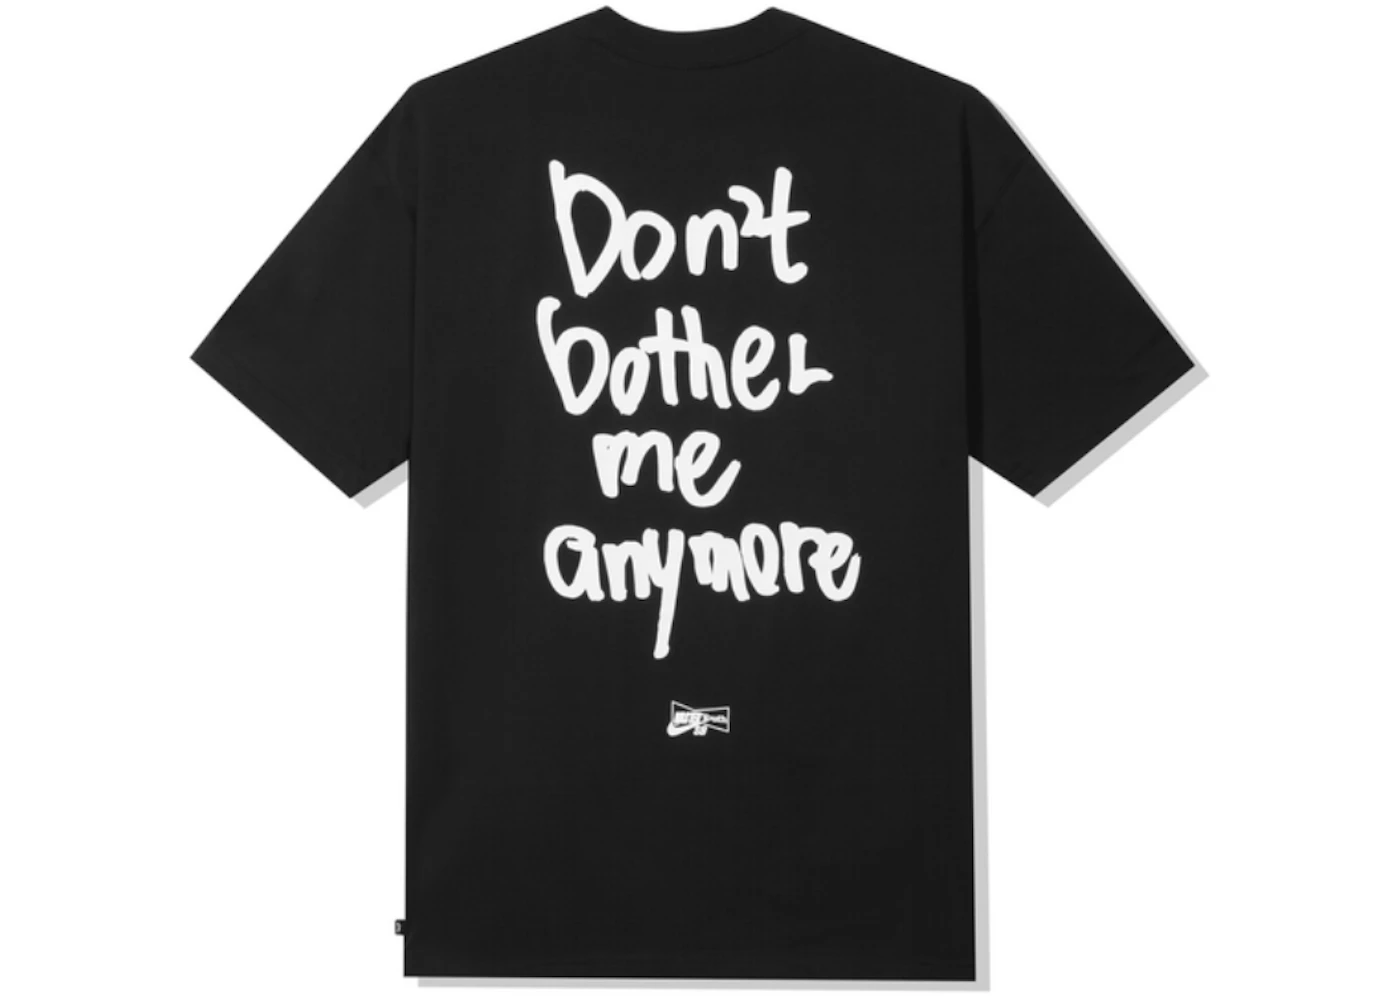 Nike x Wasted Youth D.B.M.A. T-shirt Black